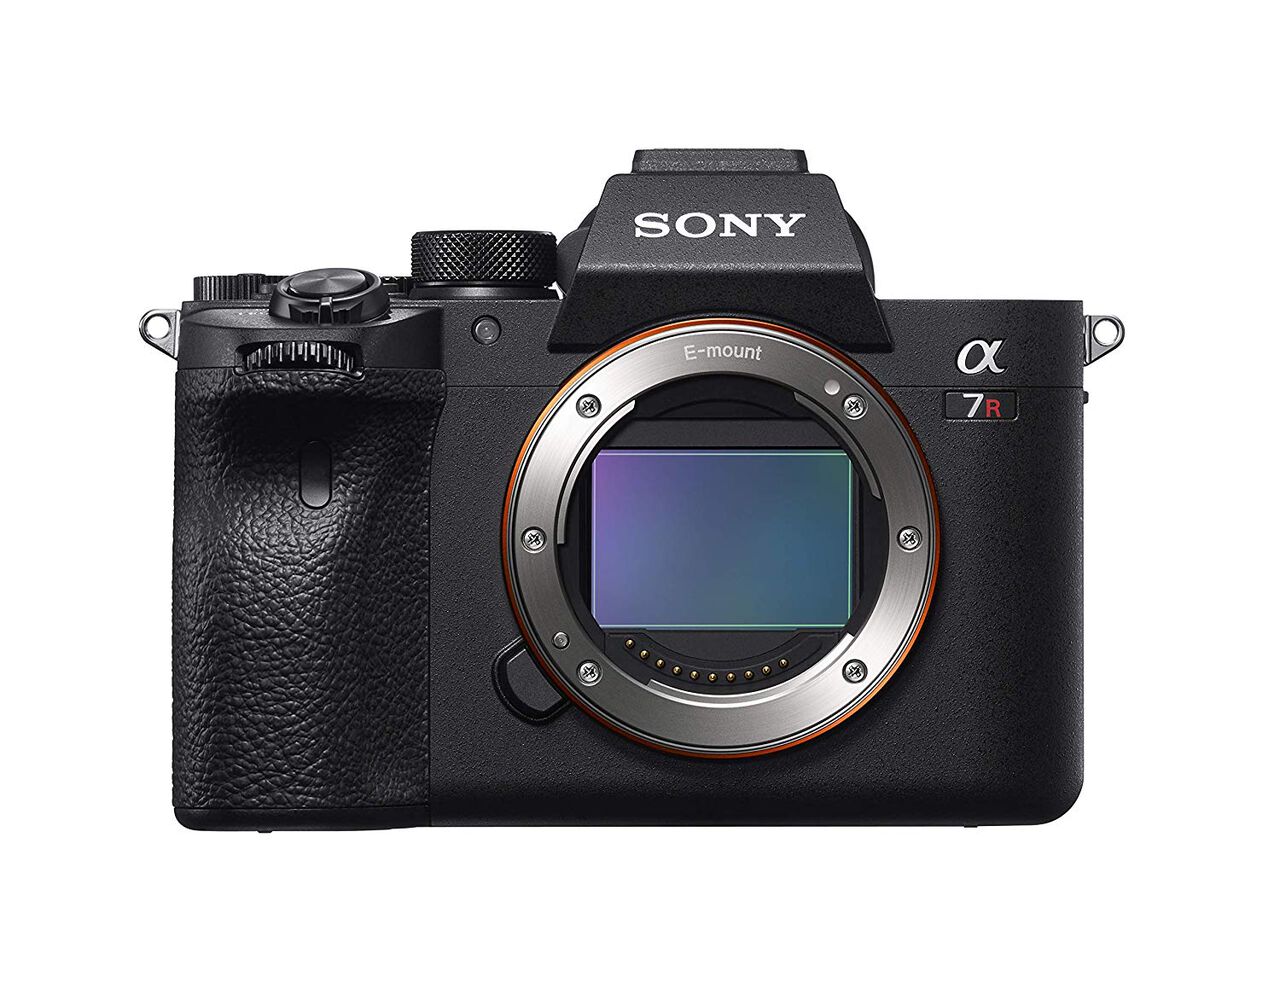 The Sony a7RIV camera for professionals